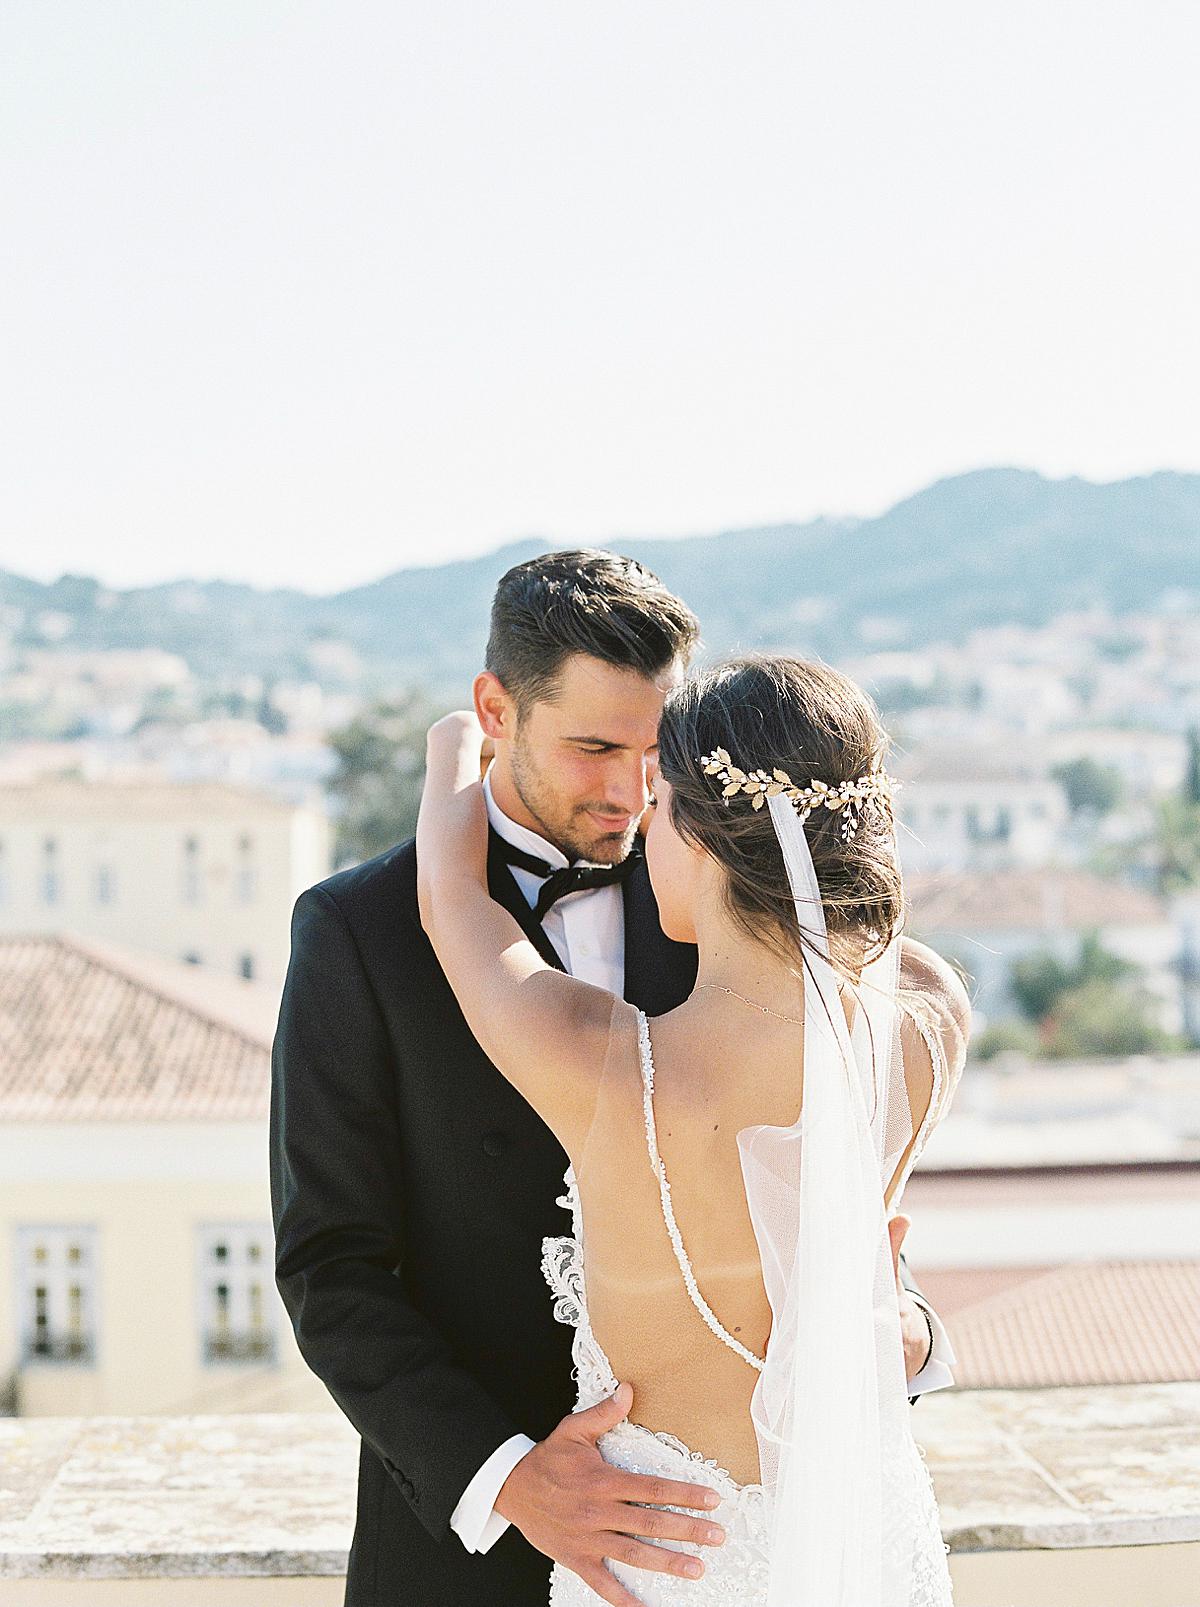 bride and groom at portrait session in spetses island greece